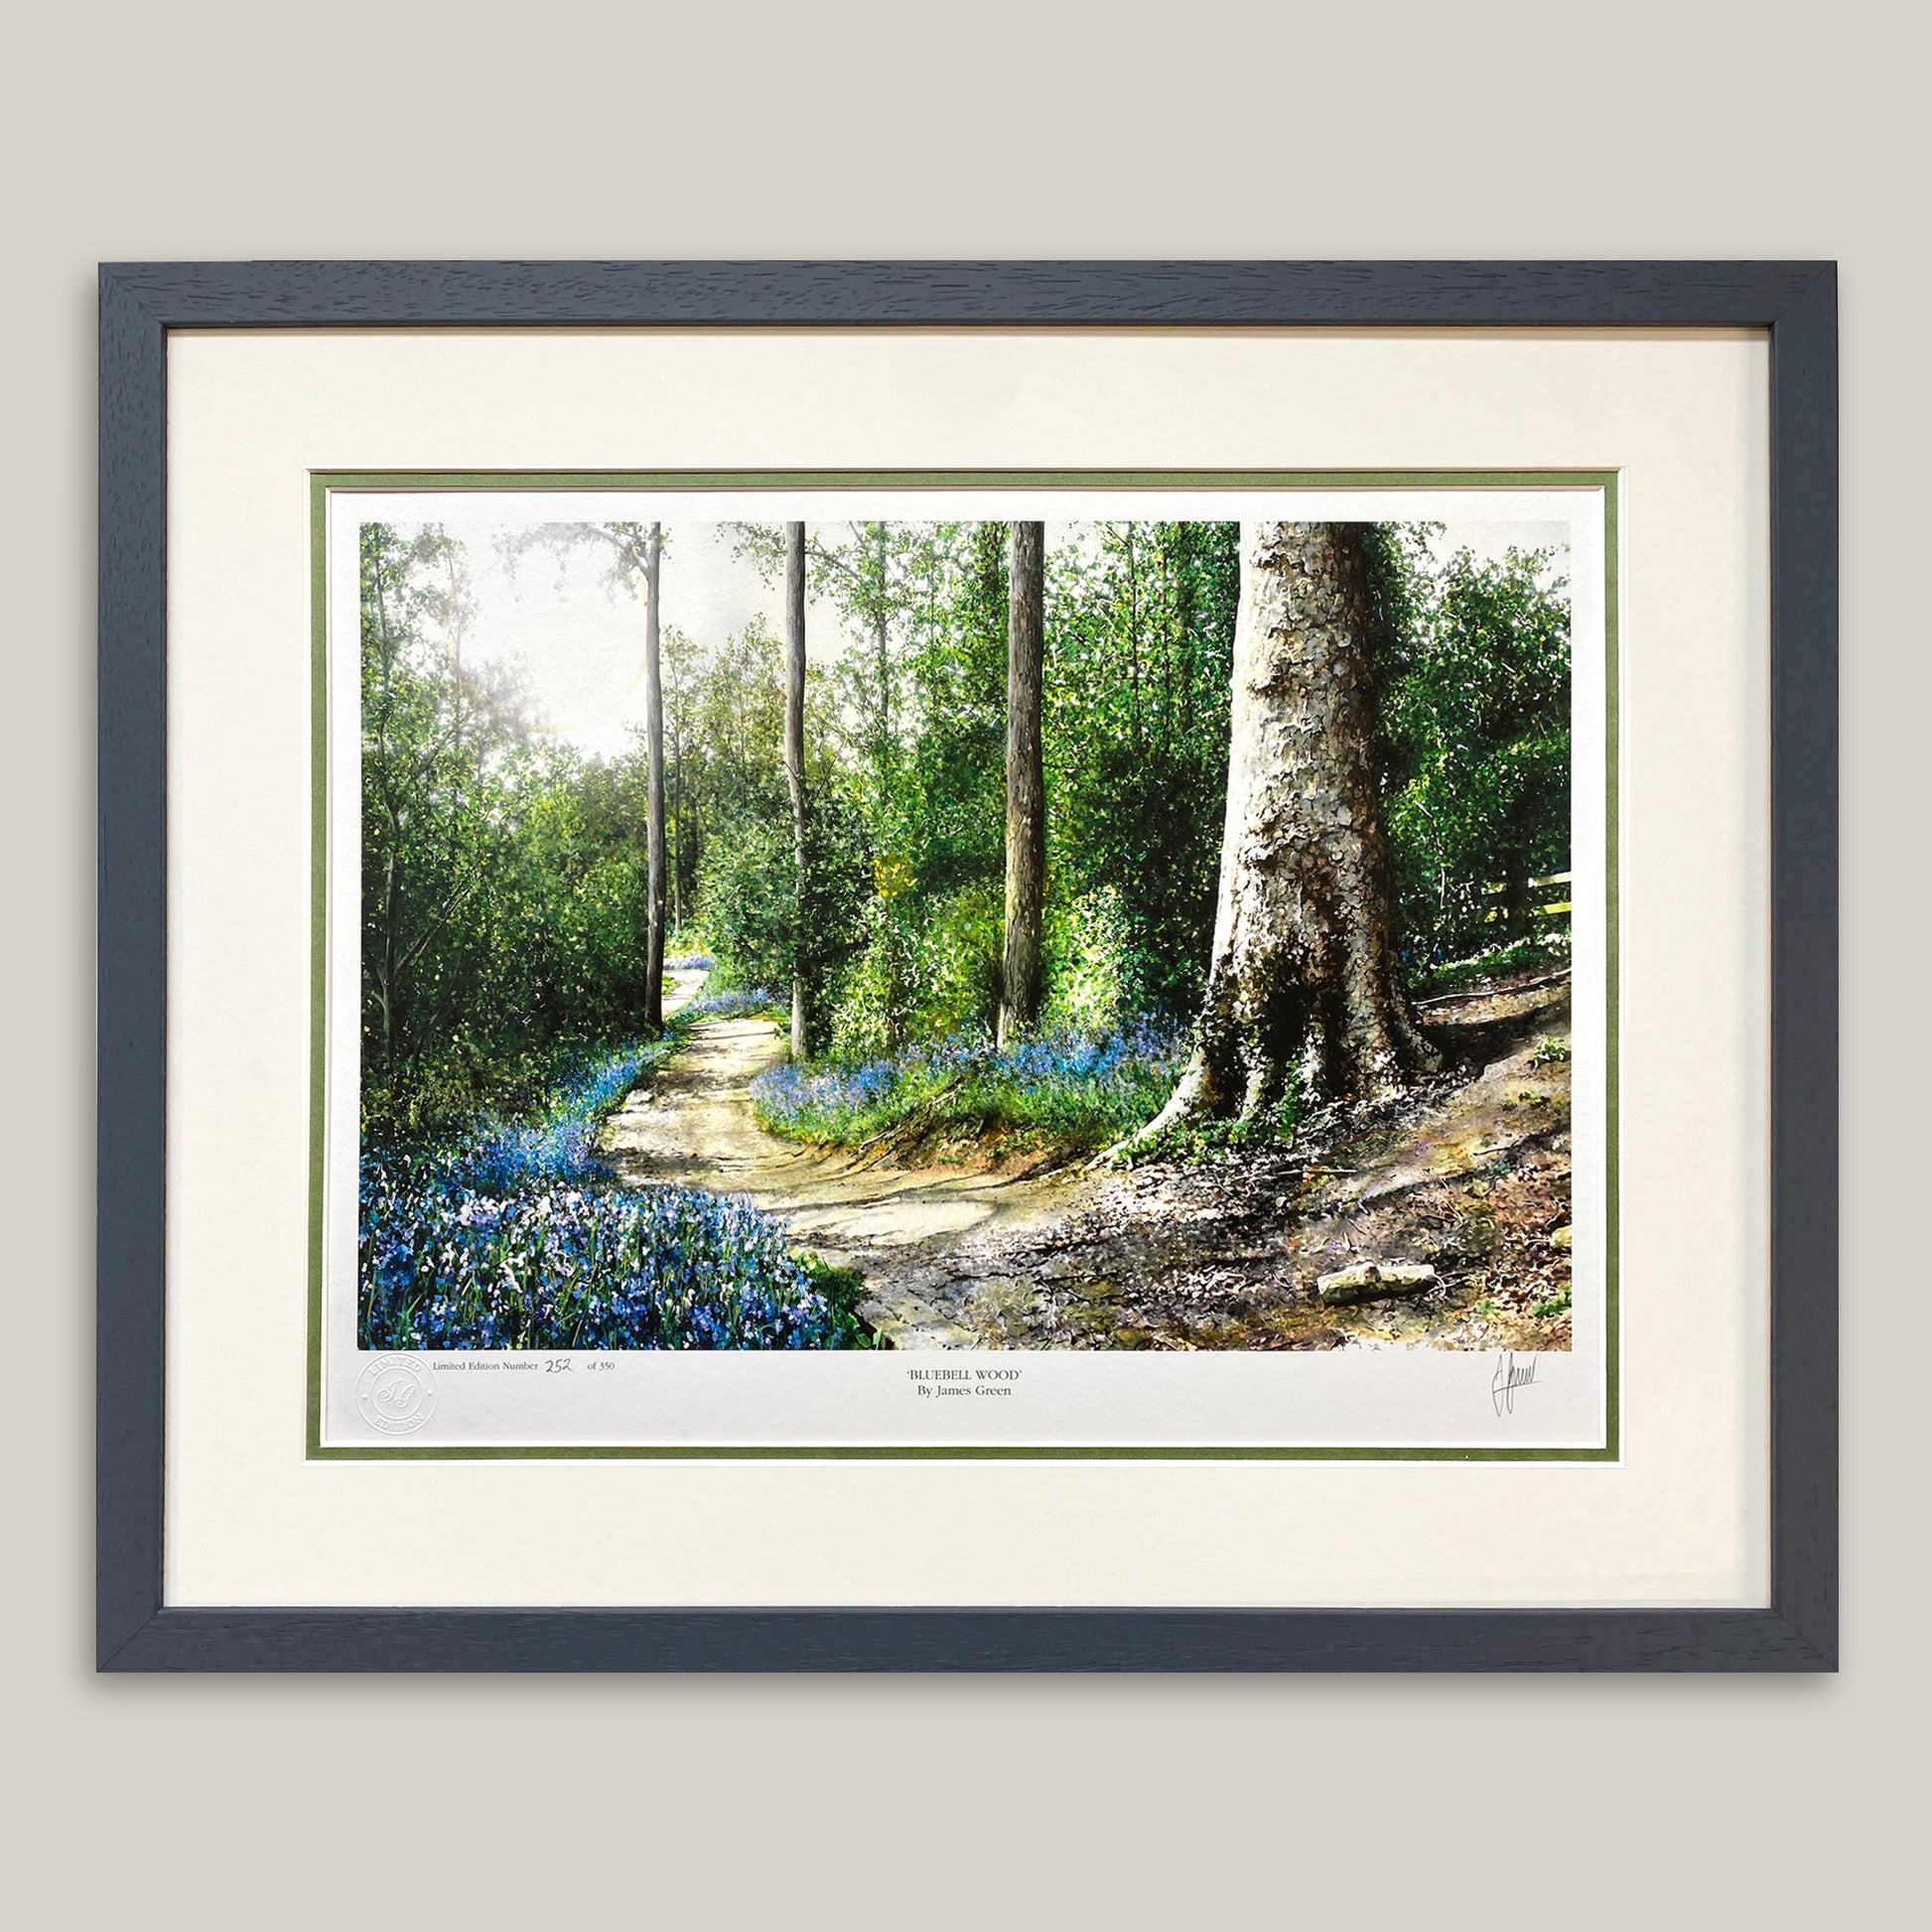 bluebells print by James Green in a blue modern style frame